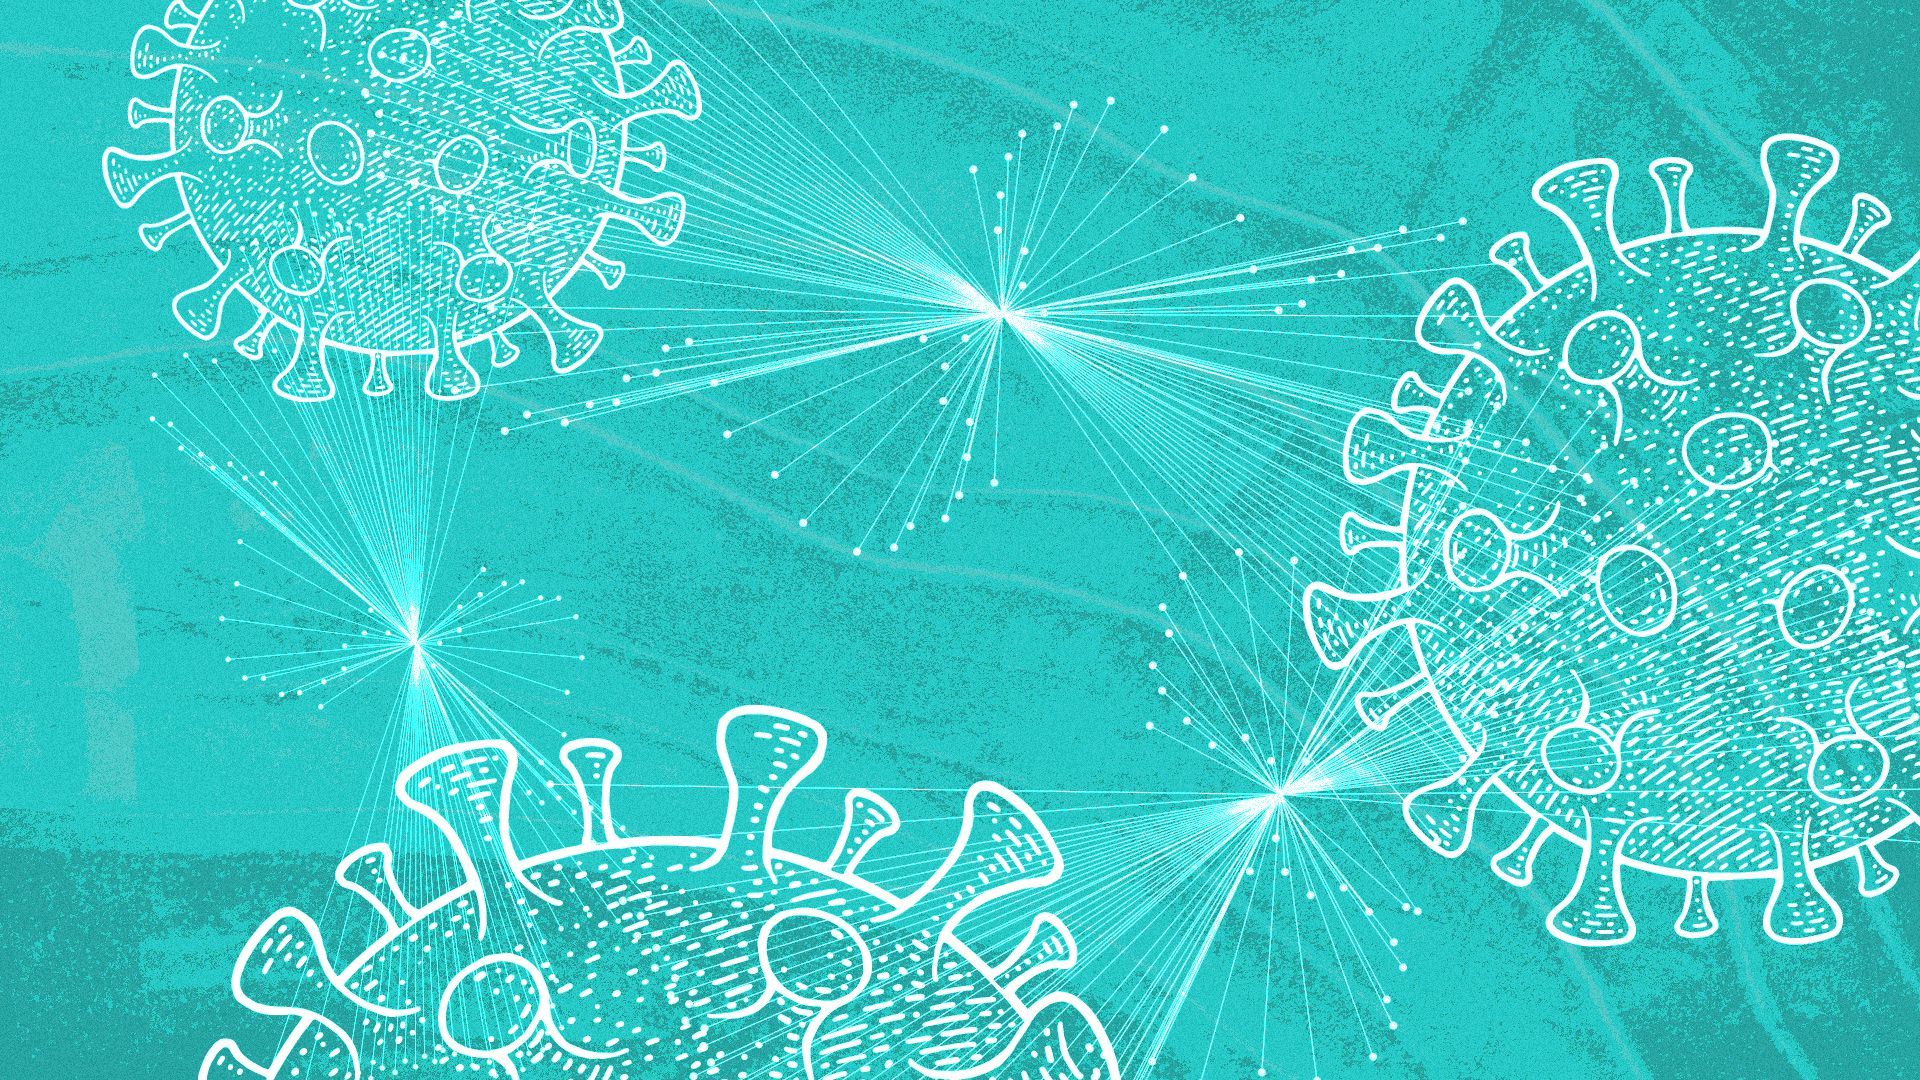 Illustration of COVID and linear diagrams on a teal background. 